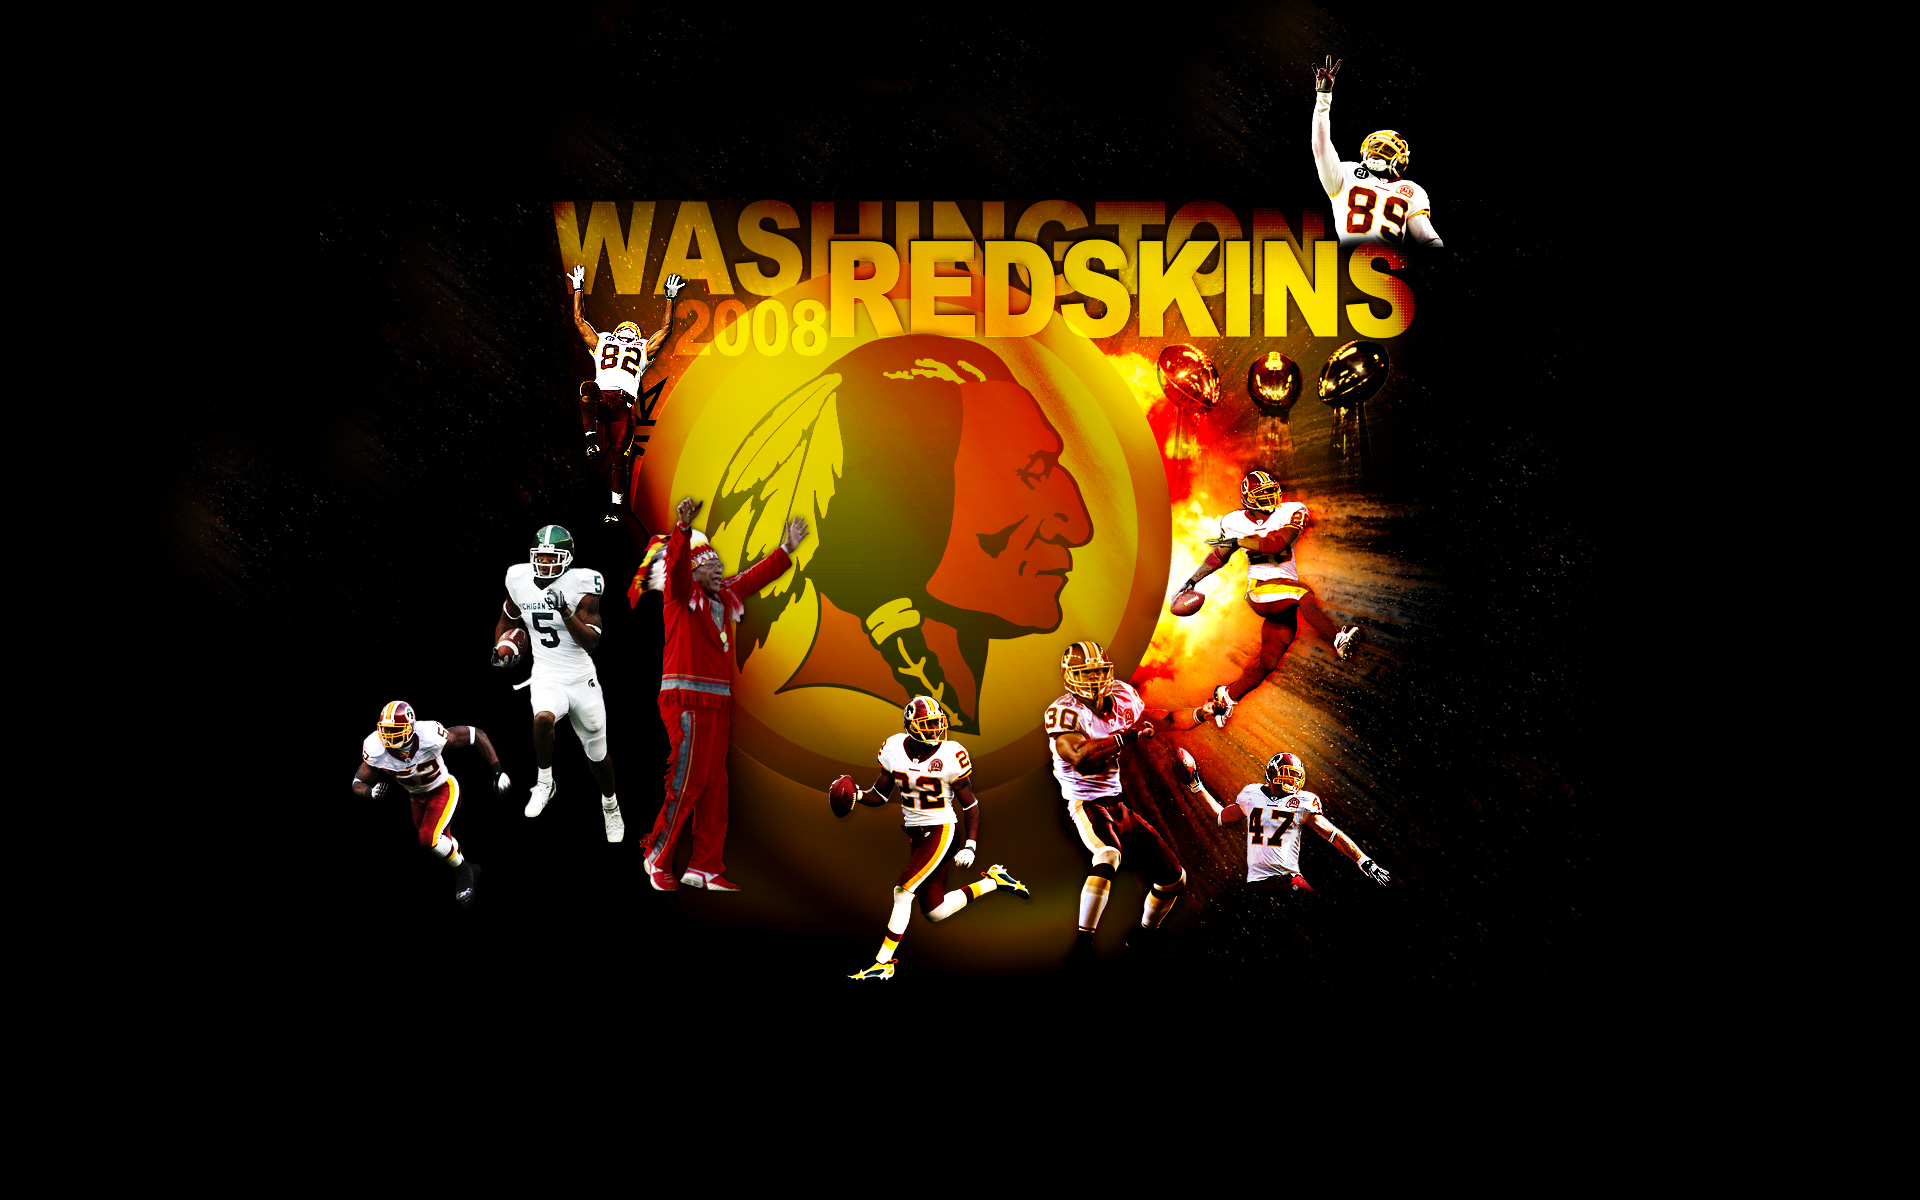 Redskins Wallpapers | Chainimage